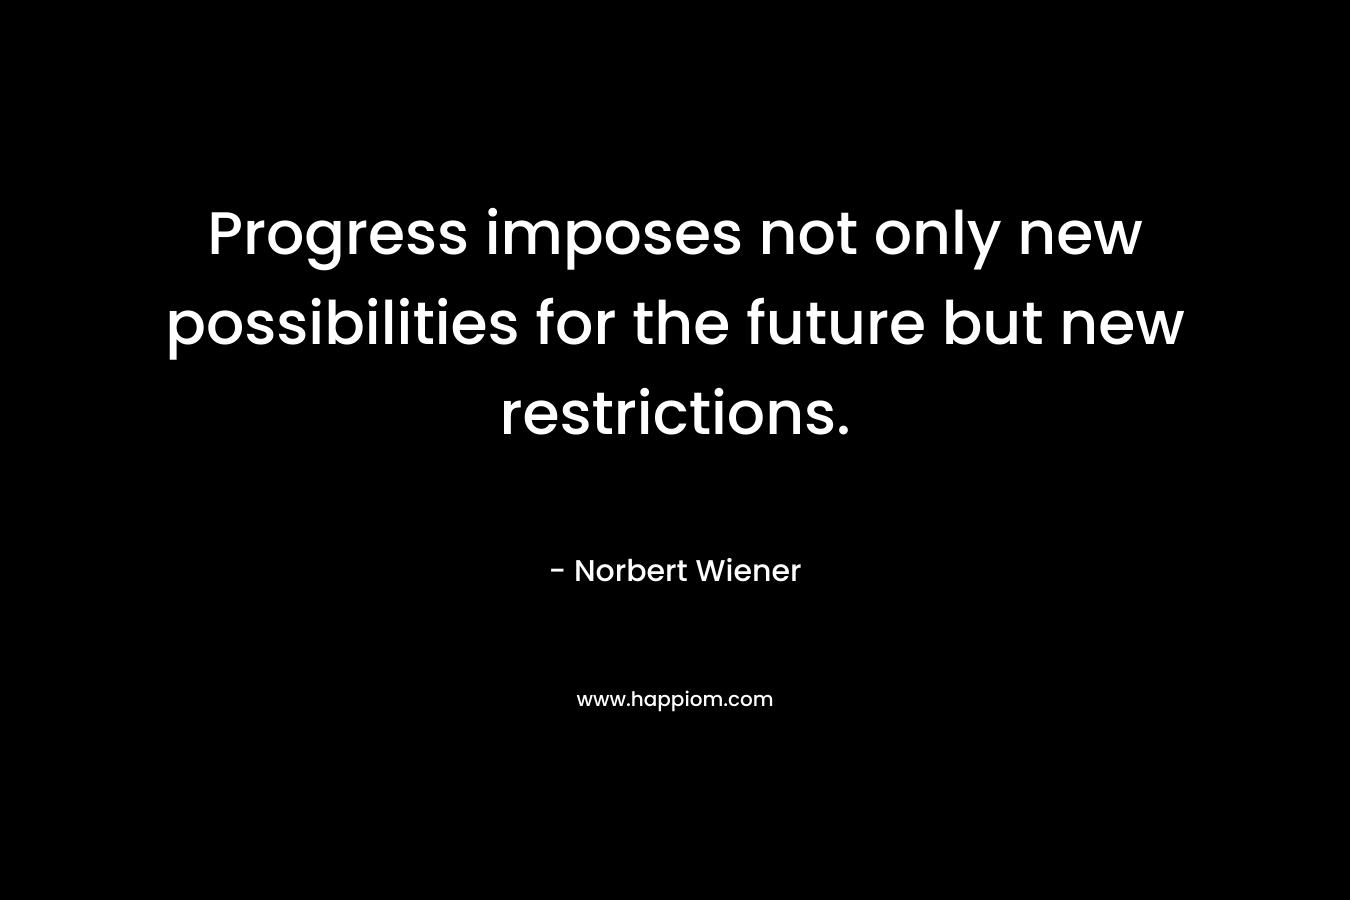 Progress imposes not only new possibilities for the future but new restrictions. – Norbert Wiener